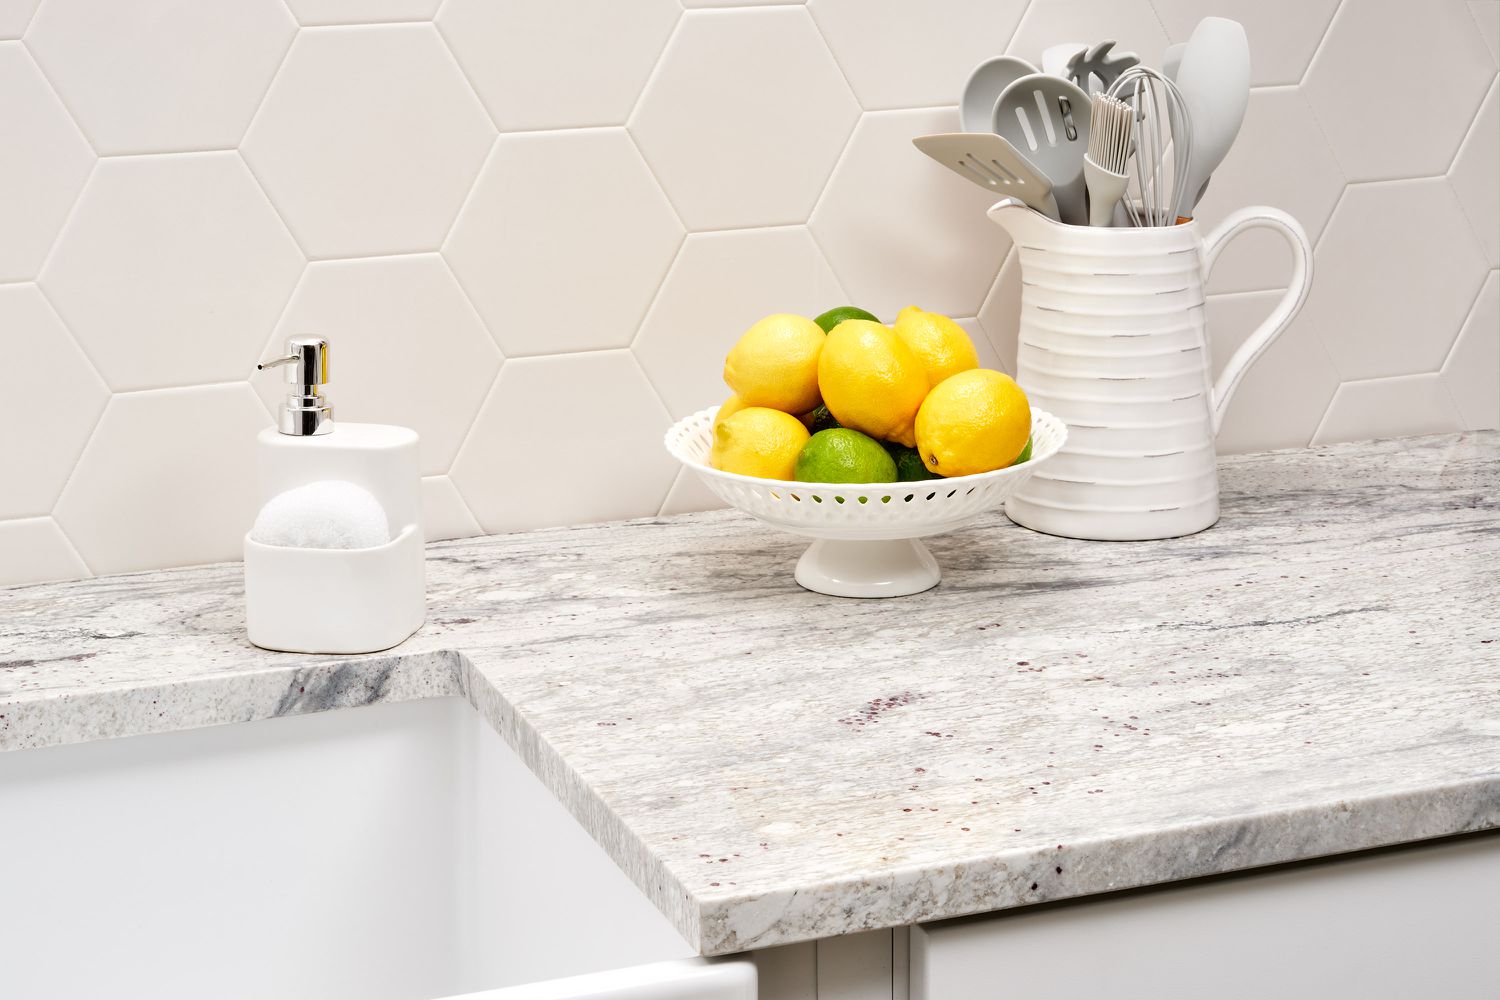 Importance of kitchen countertops: How to choose the right material?